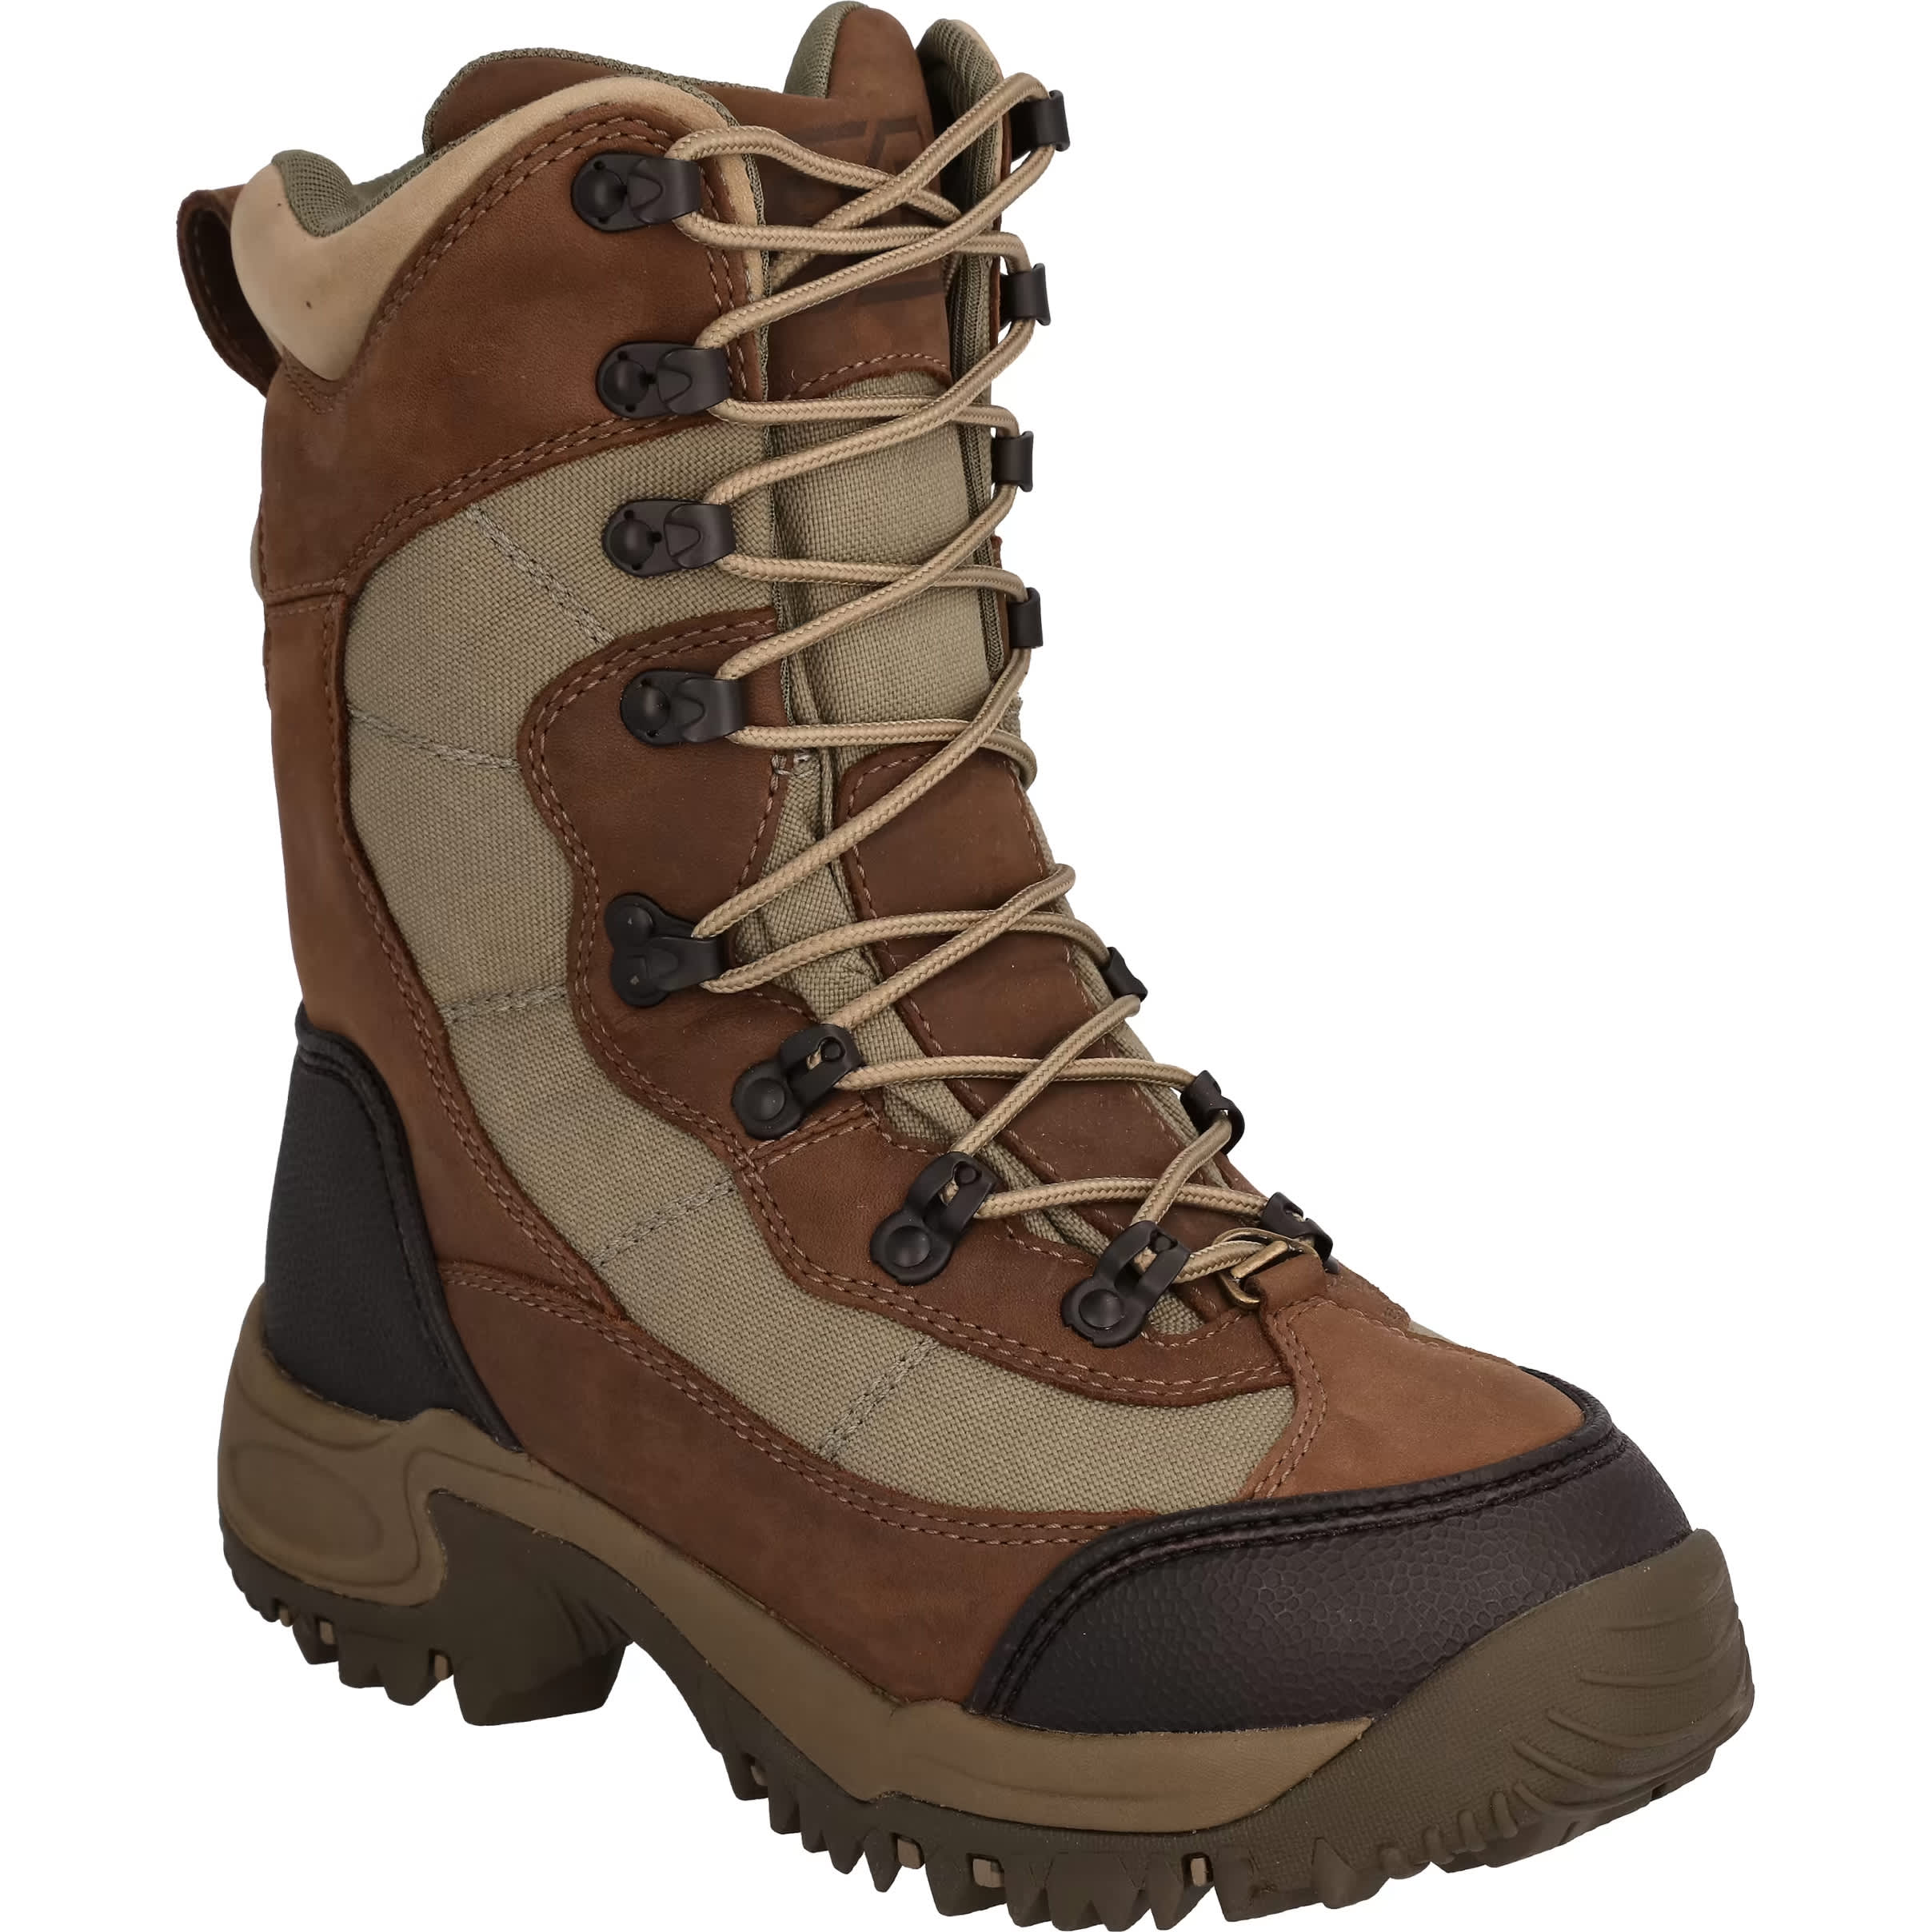 SHE Outdoor® Women’s Inferno II Insulated Waterproof Hunting Boots